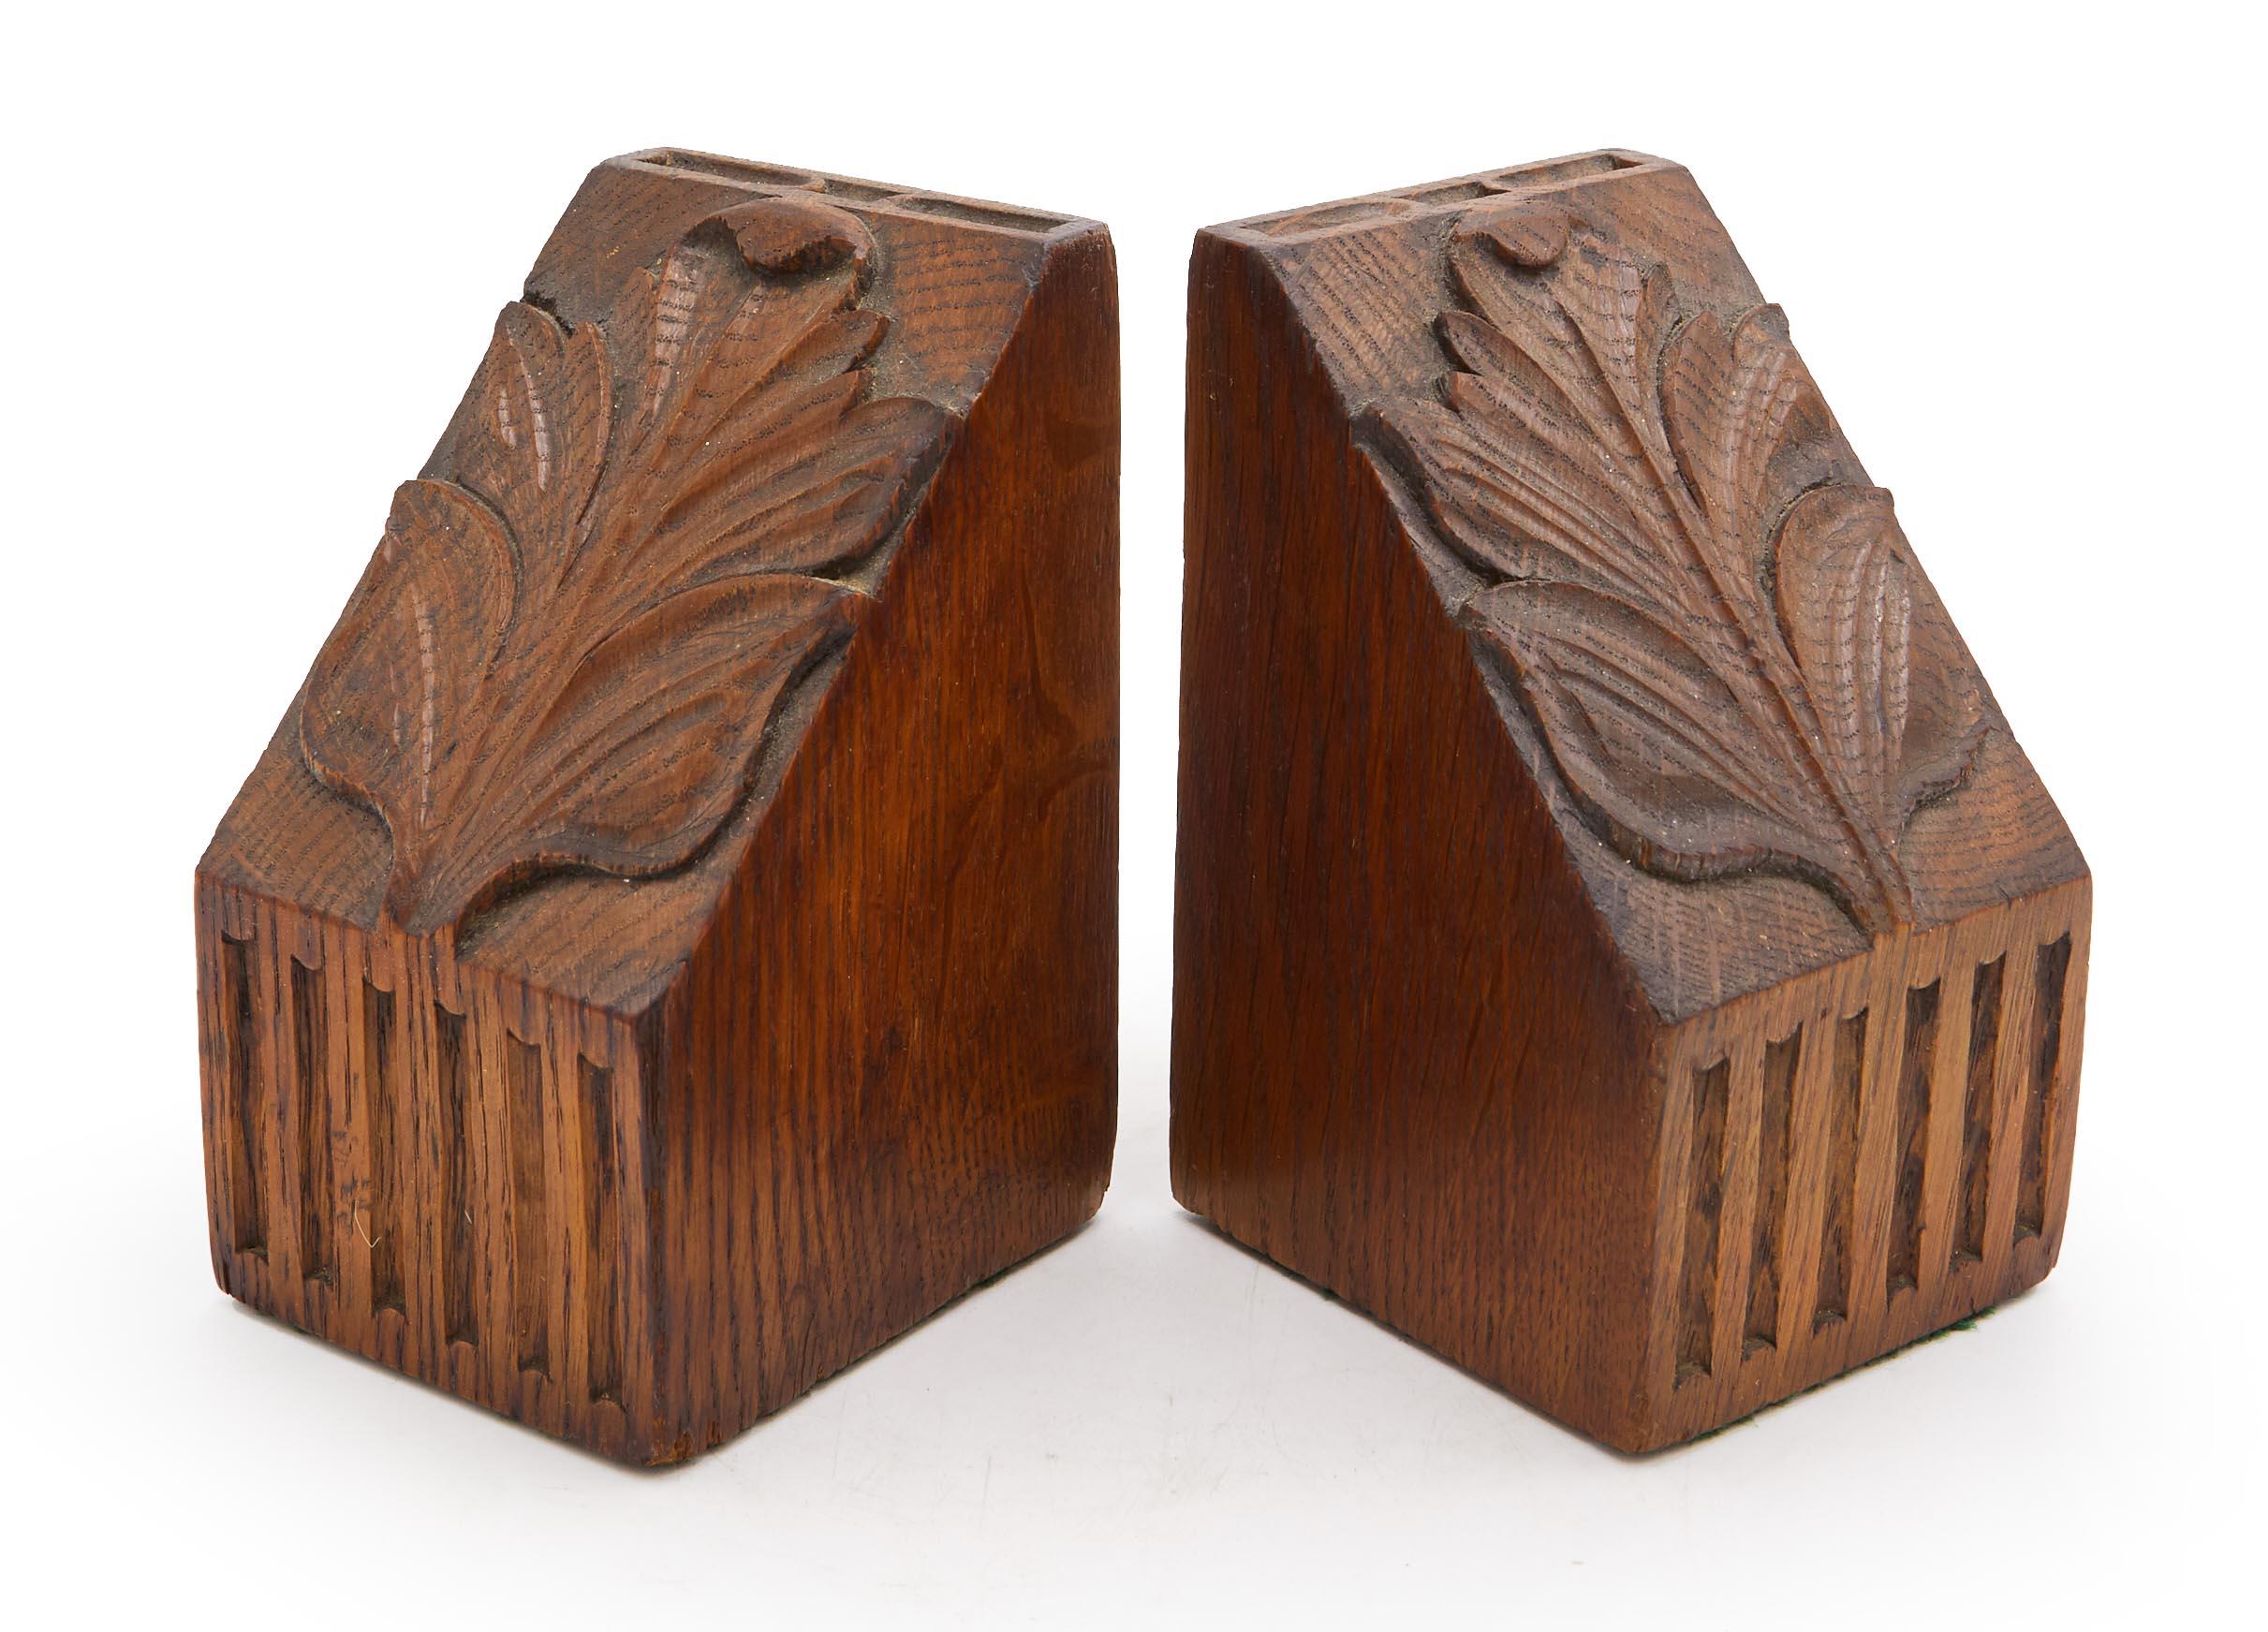 Pair of Mid-Century carved oak bookends with leaf designs (PRICED AS PAIR).